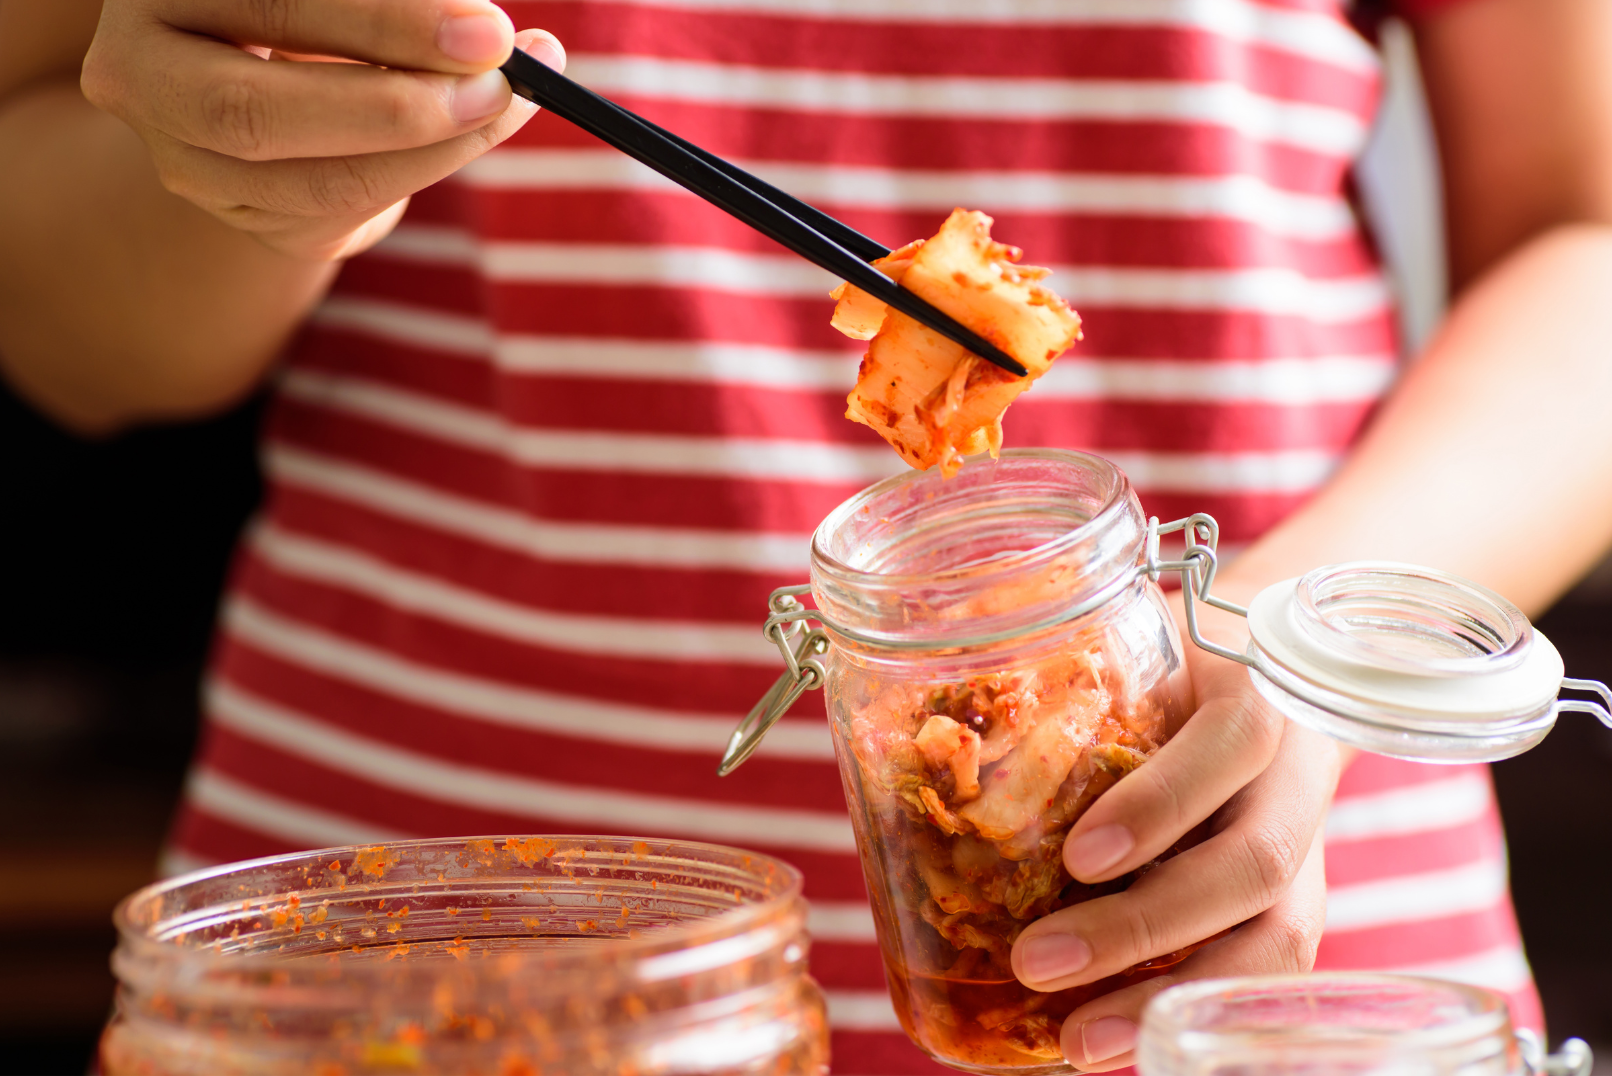 Some Homemade Kimchi being pulled from a jar, a rich, natural source of probiotics